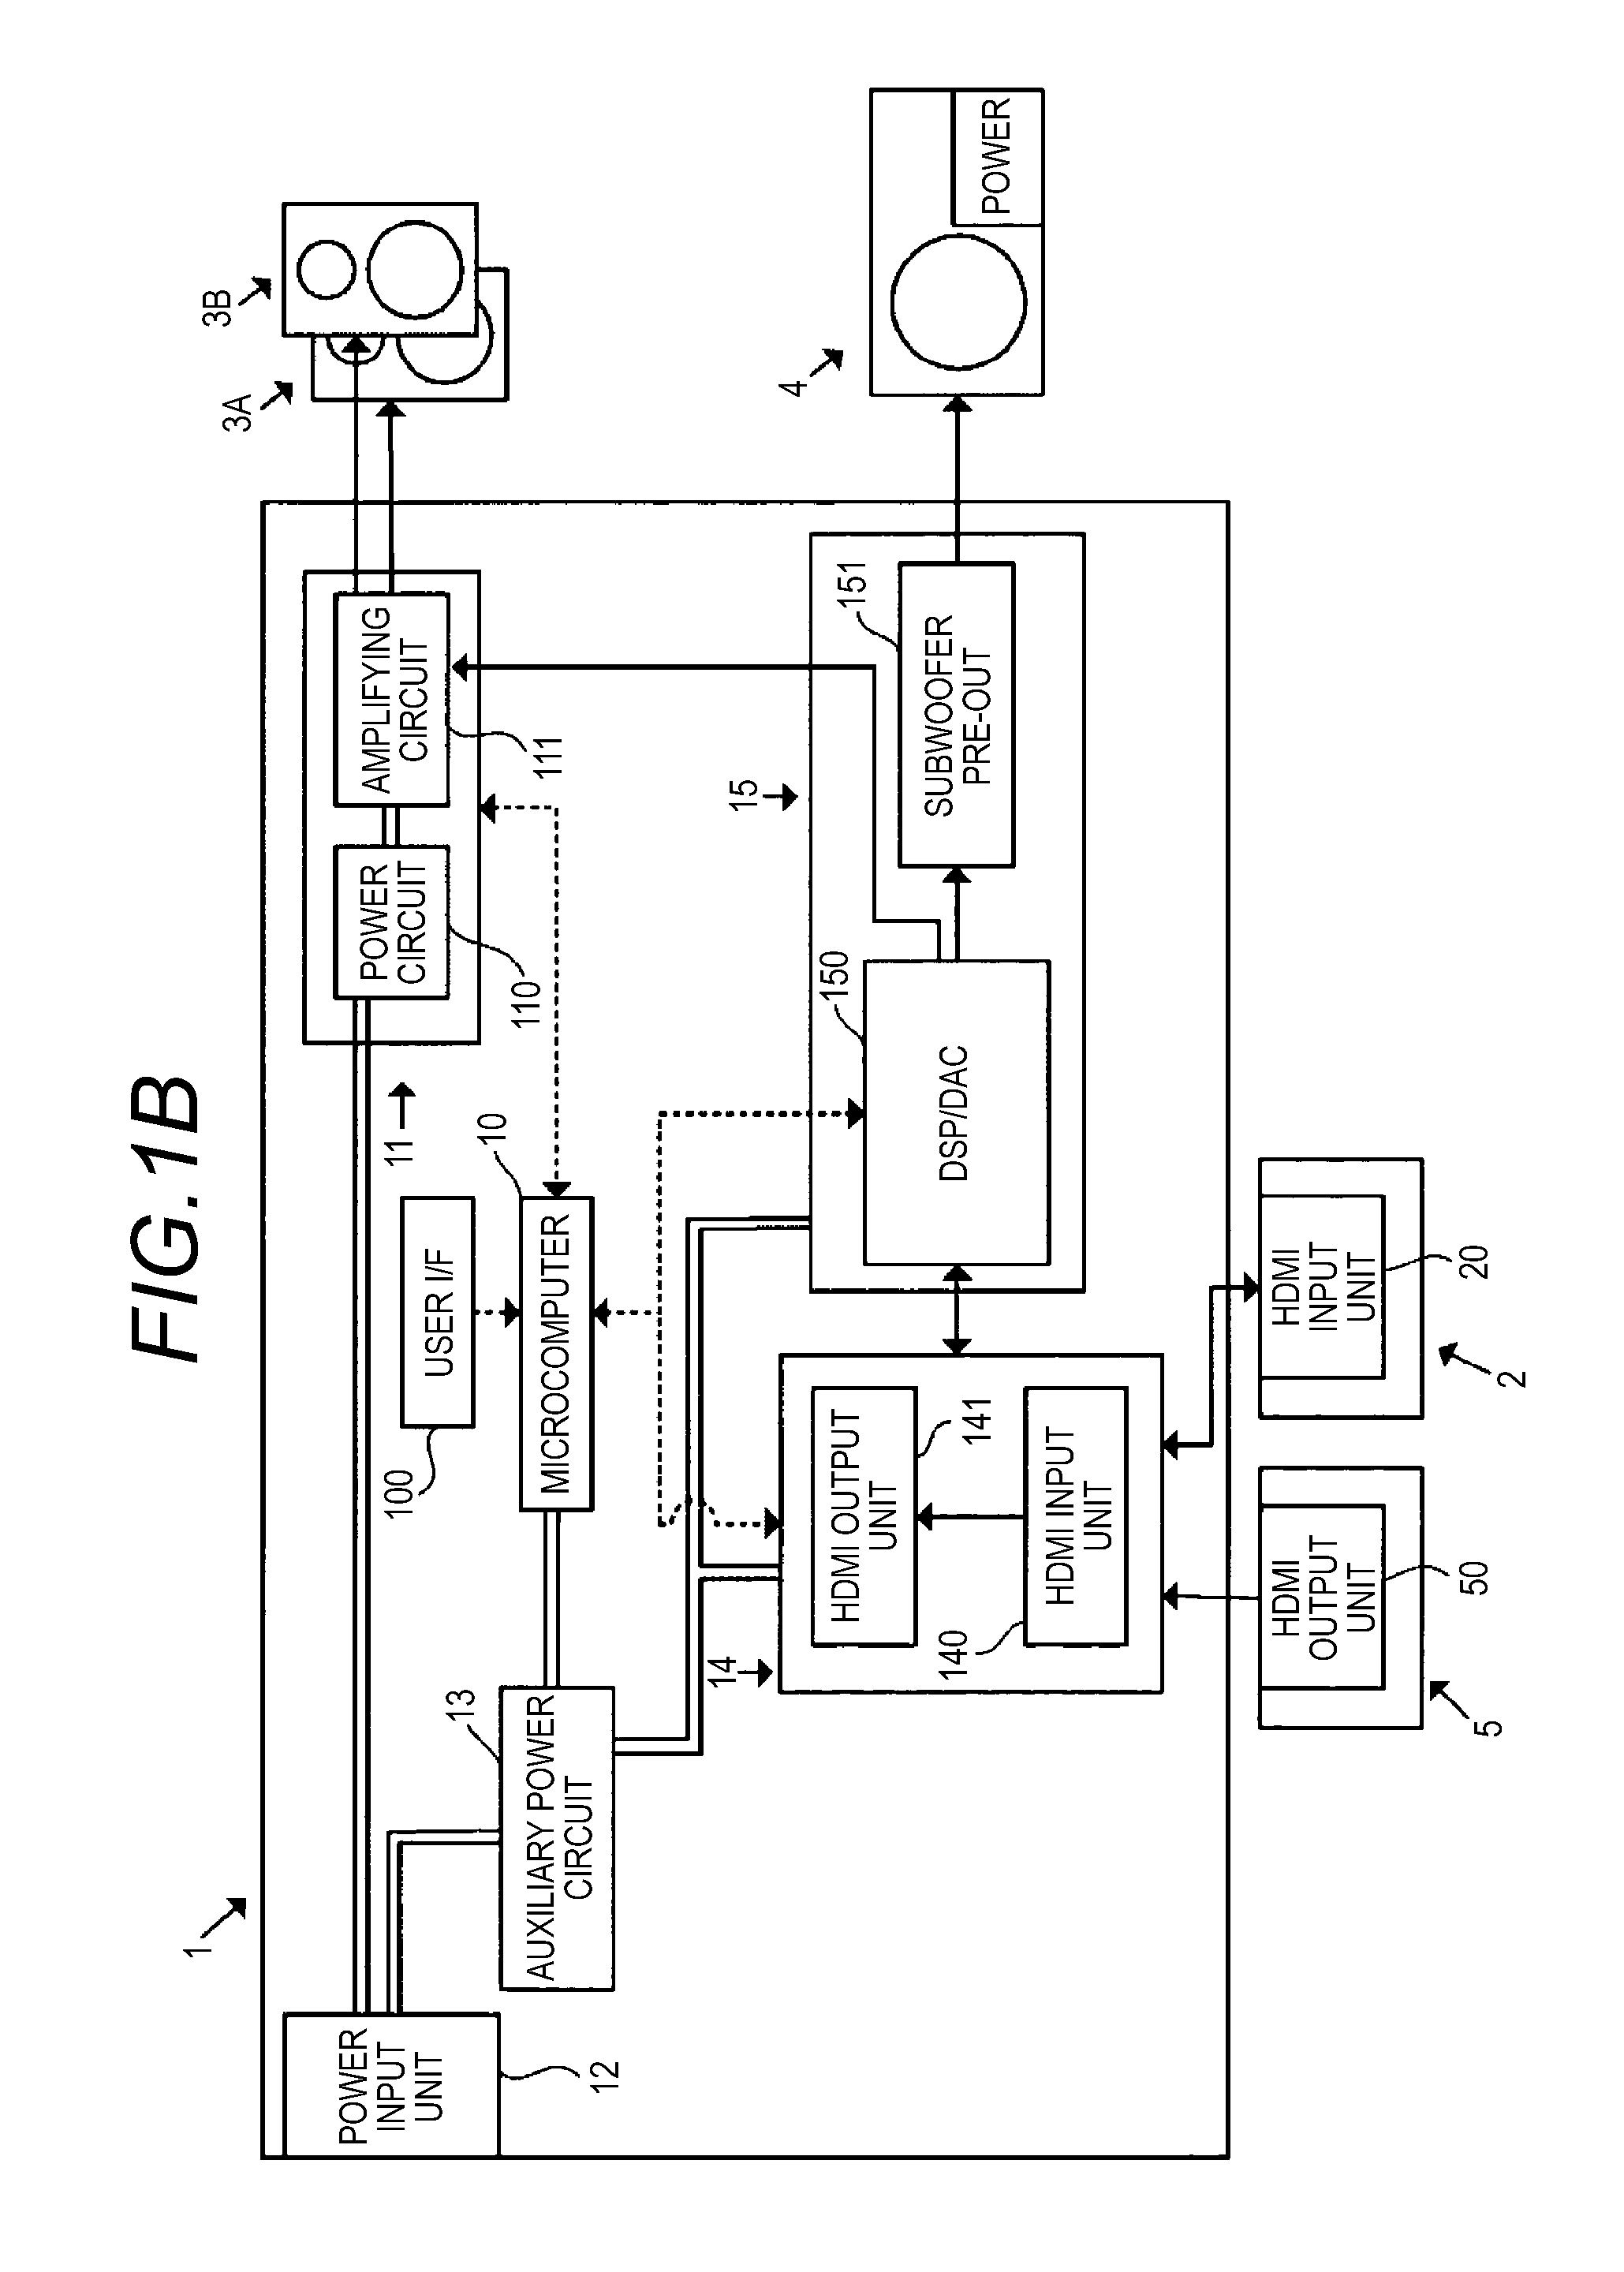 Acoustic Processing Device